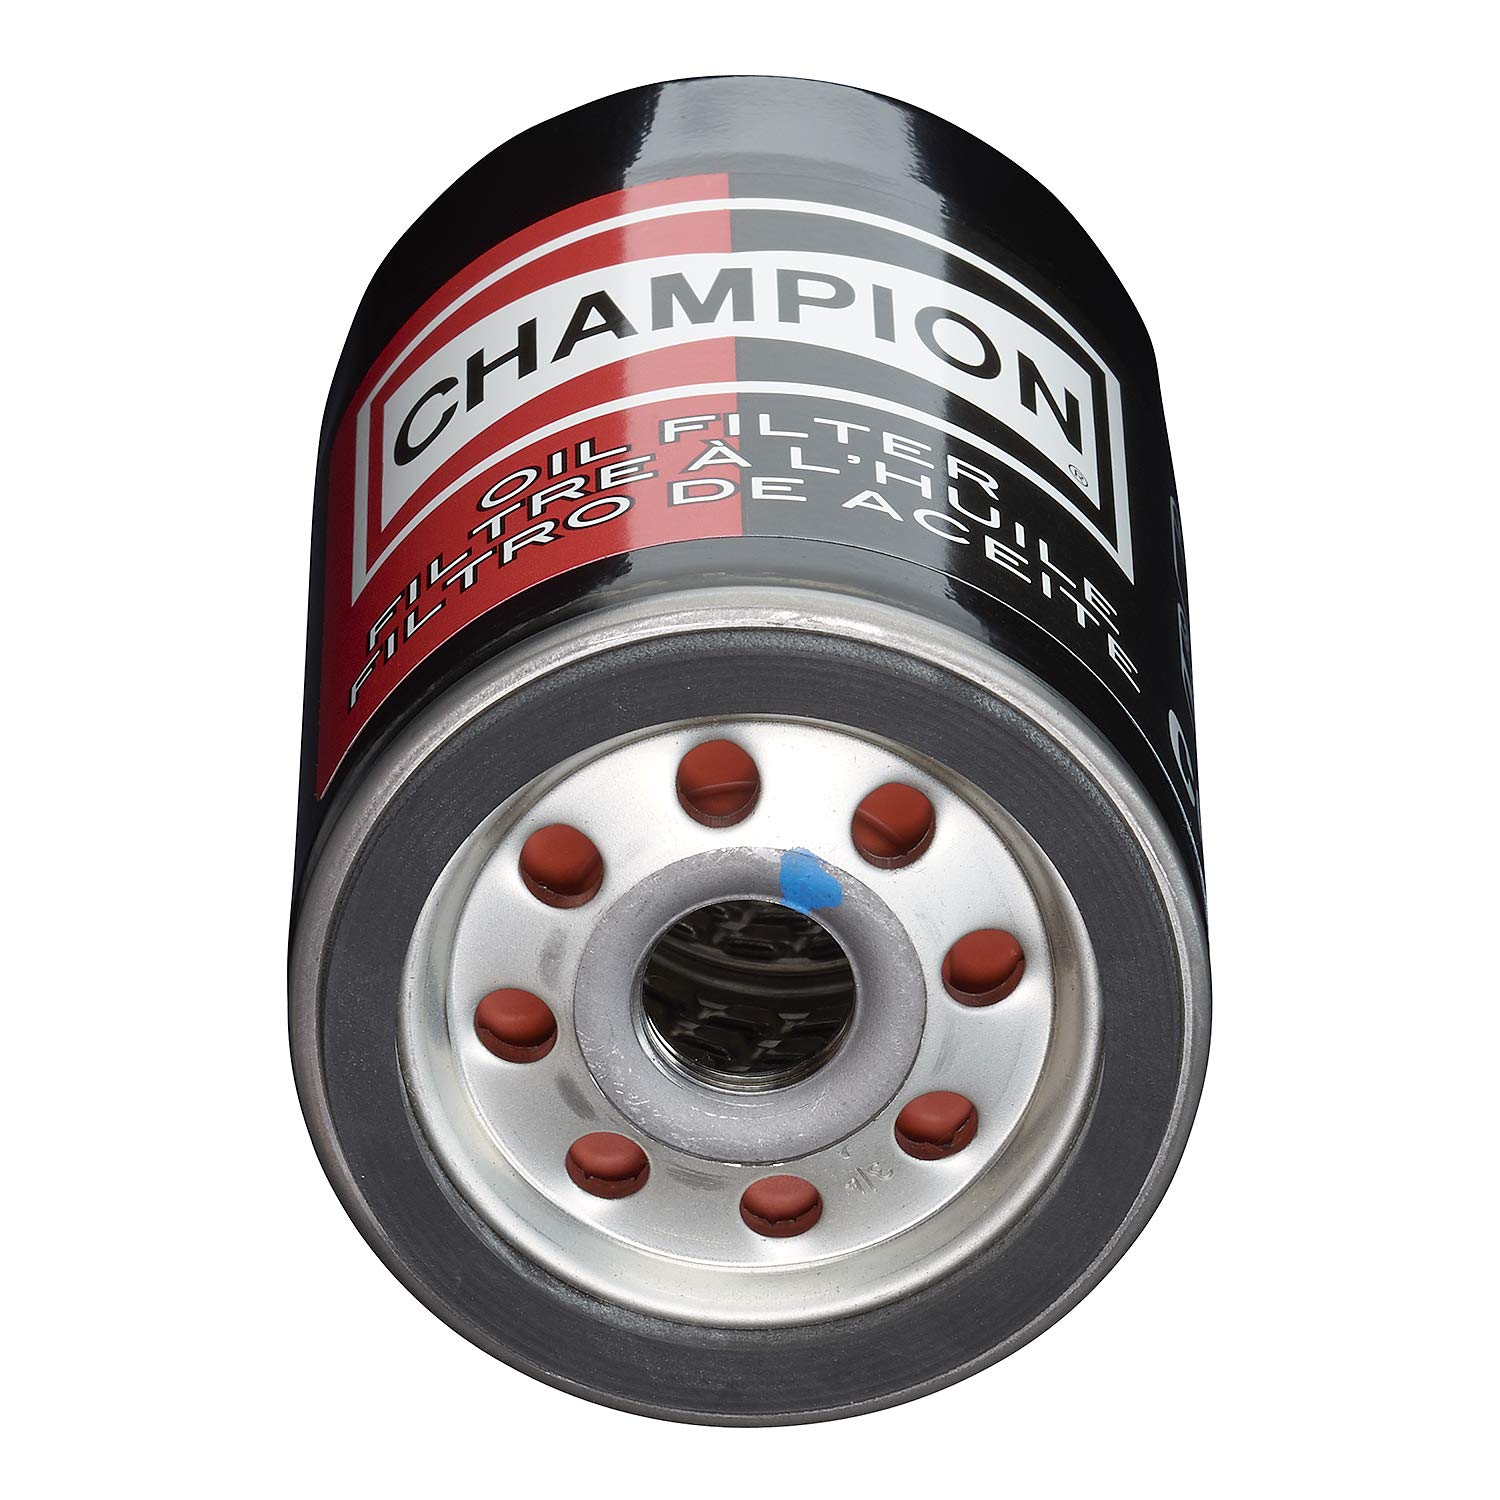 Champion COS2870A Spin-On Oil Filter Audi/VW/Linde 1971-2016